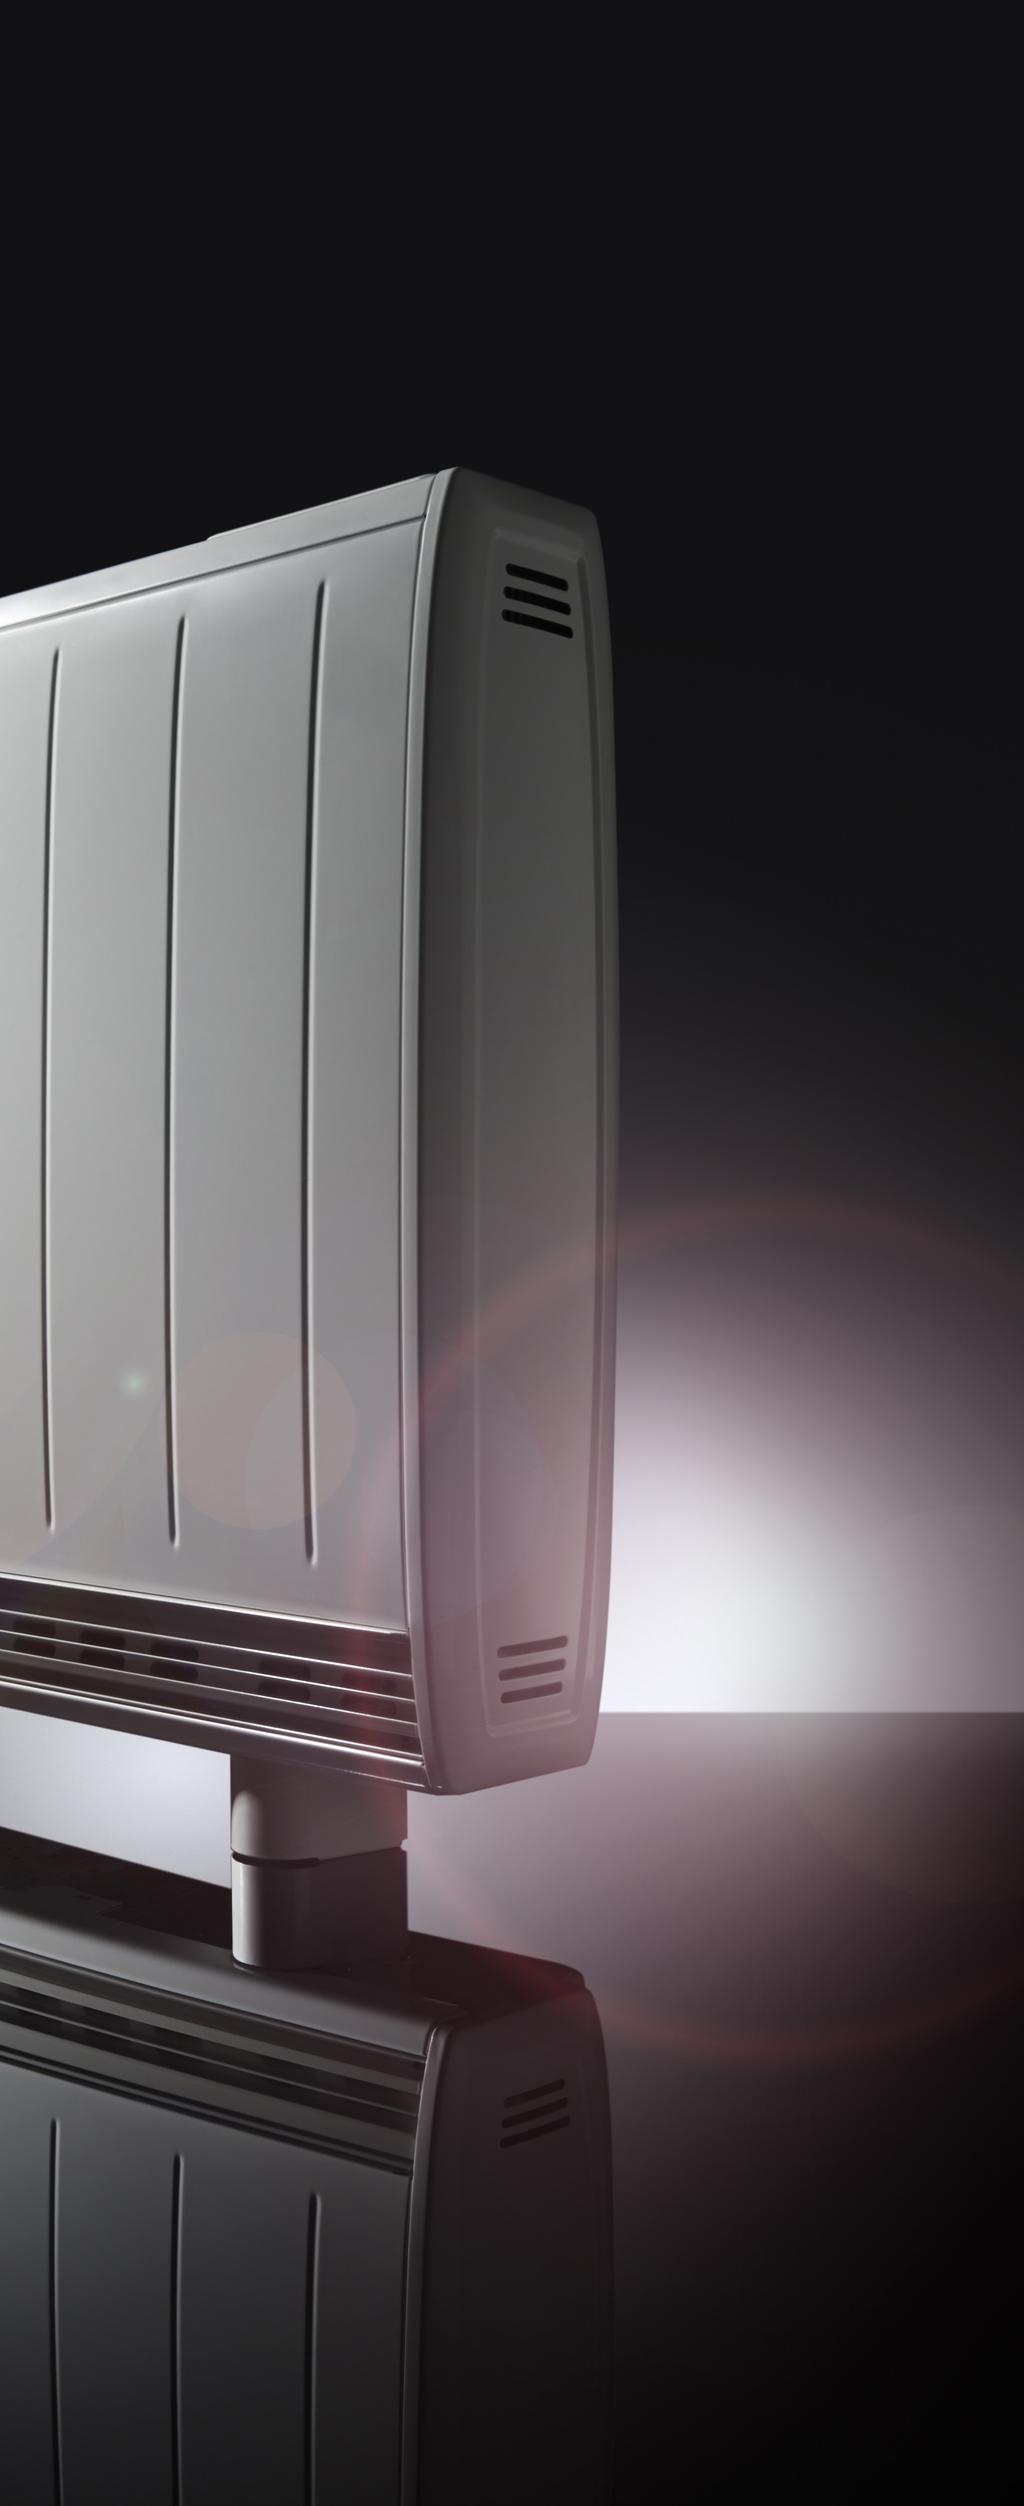 Why is Quantum so good? It saves you money Quantum is up to 27% cheaper to run and uses up to 22% less energy than a standard storage heater system.